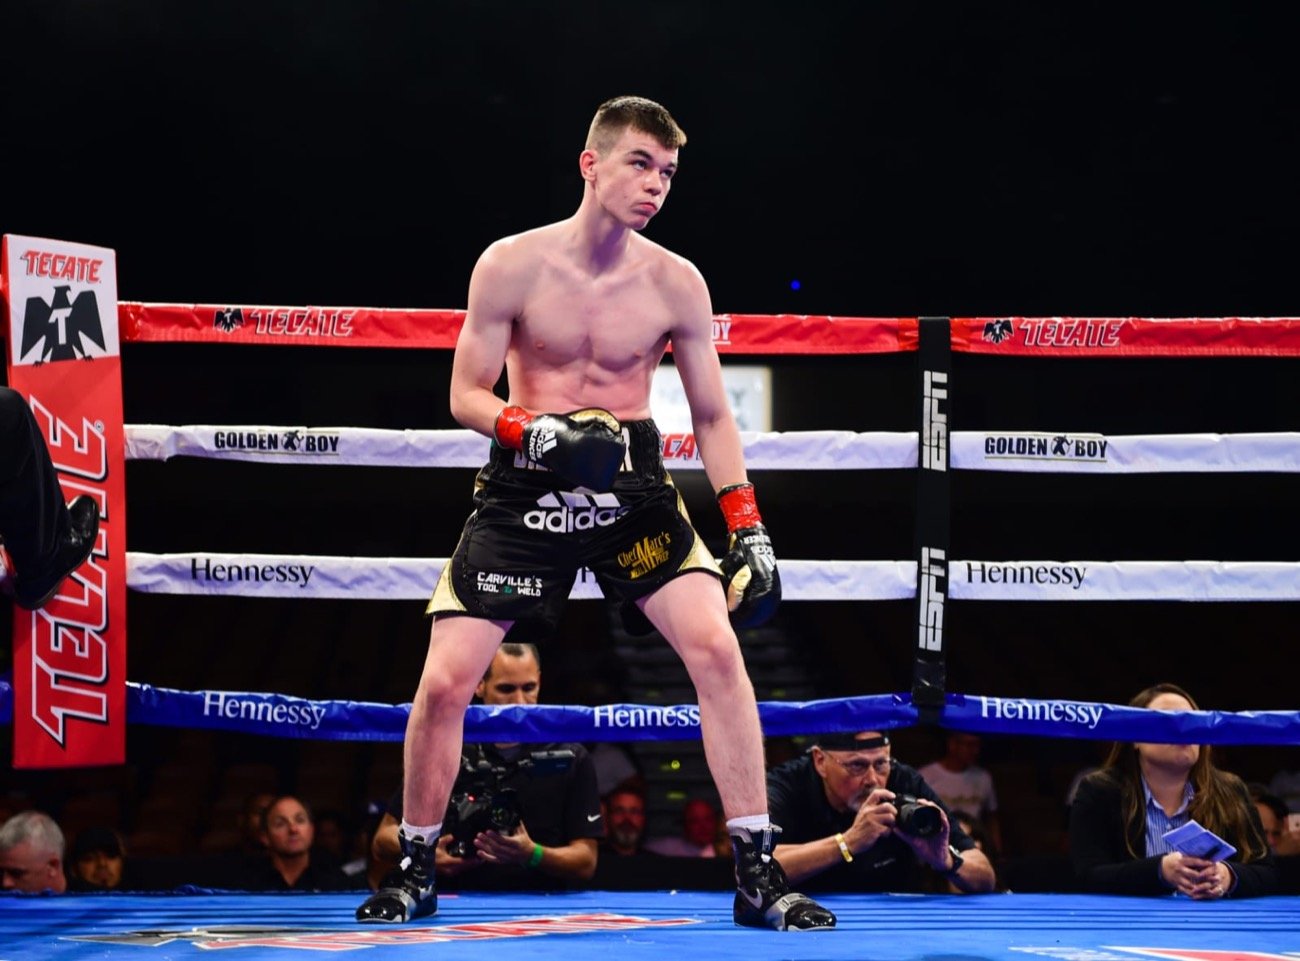 Stevie Mckenna: “I Try To Take Opponent’s Heads Off With Every Punch I Throw!”